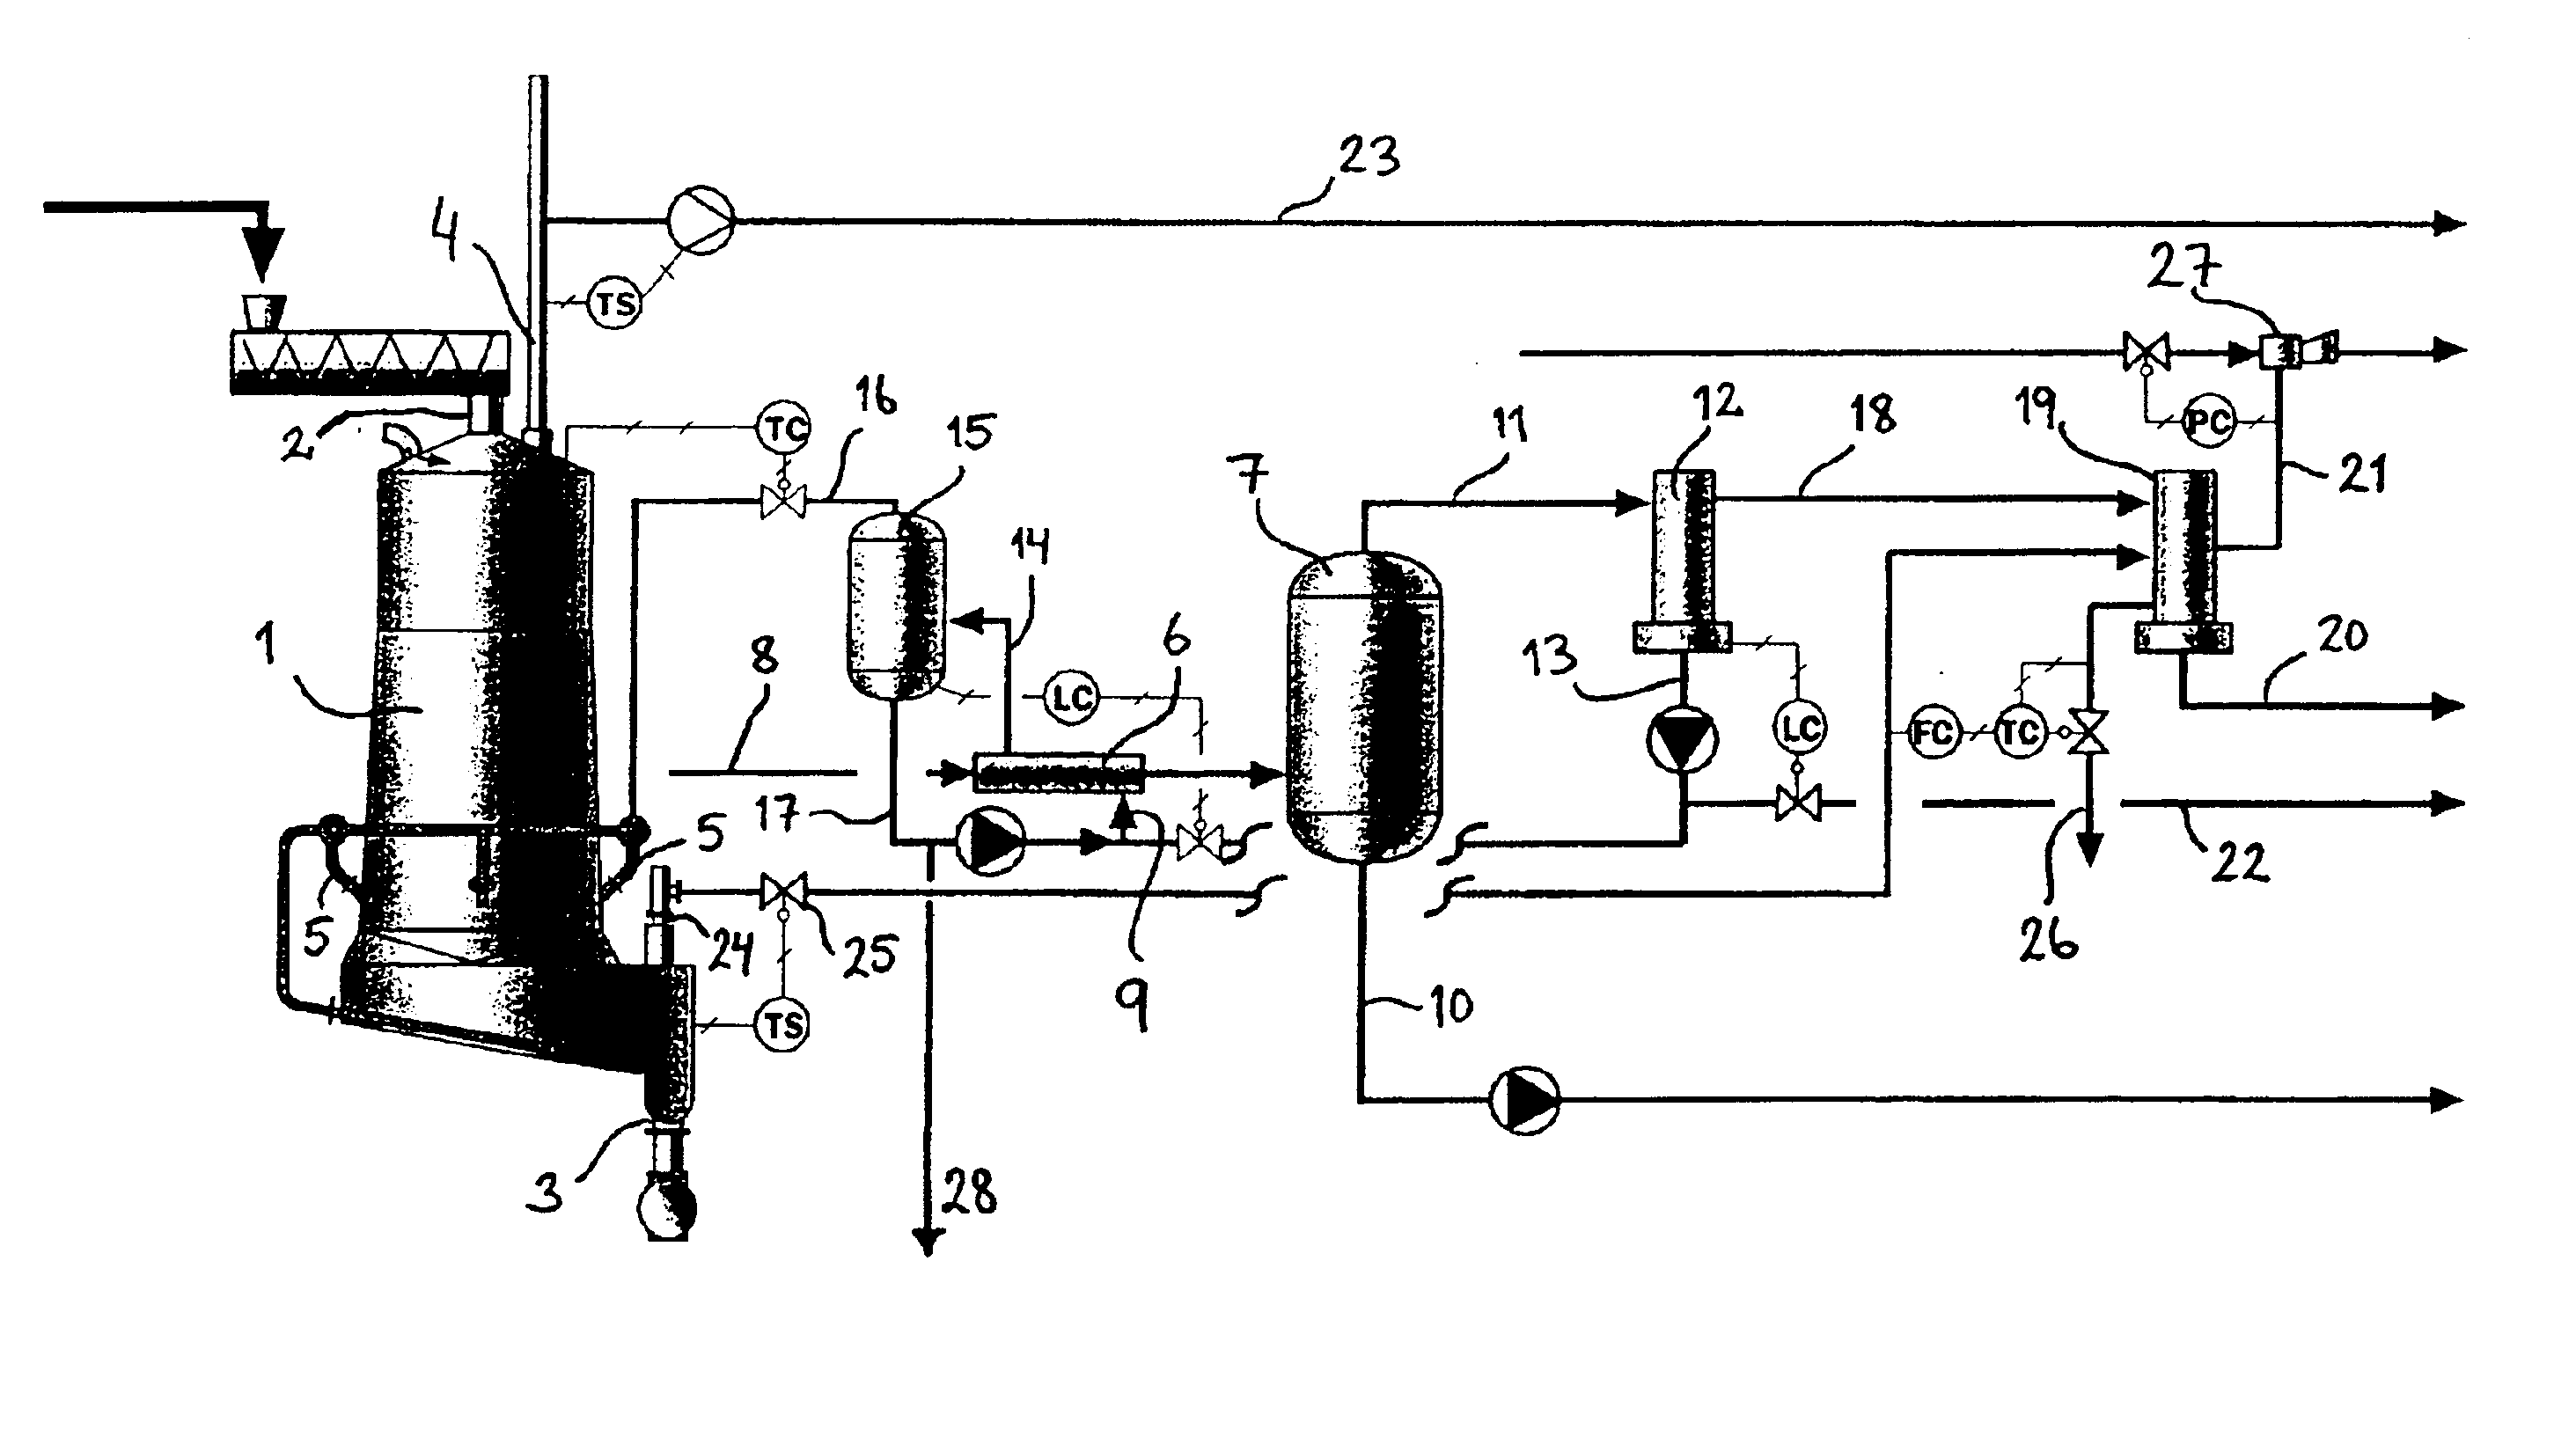 Method of producing process steam from a black liquor